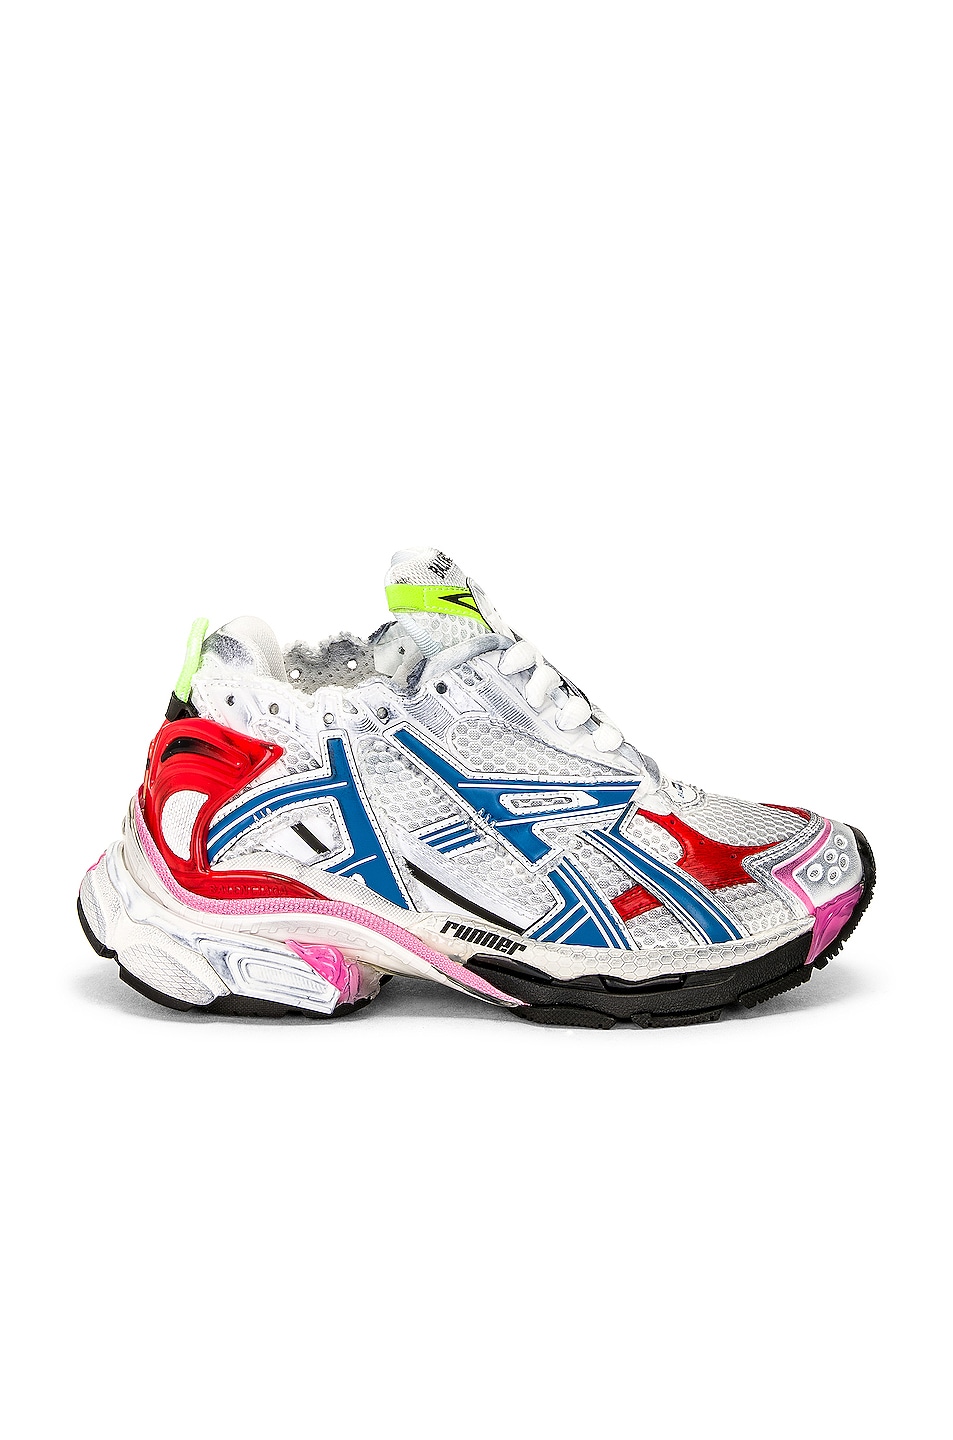 Image 1 of Balenciaga Runner Sneaker in White, Red, Blue, & Pink